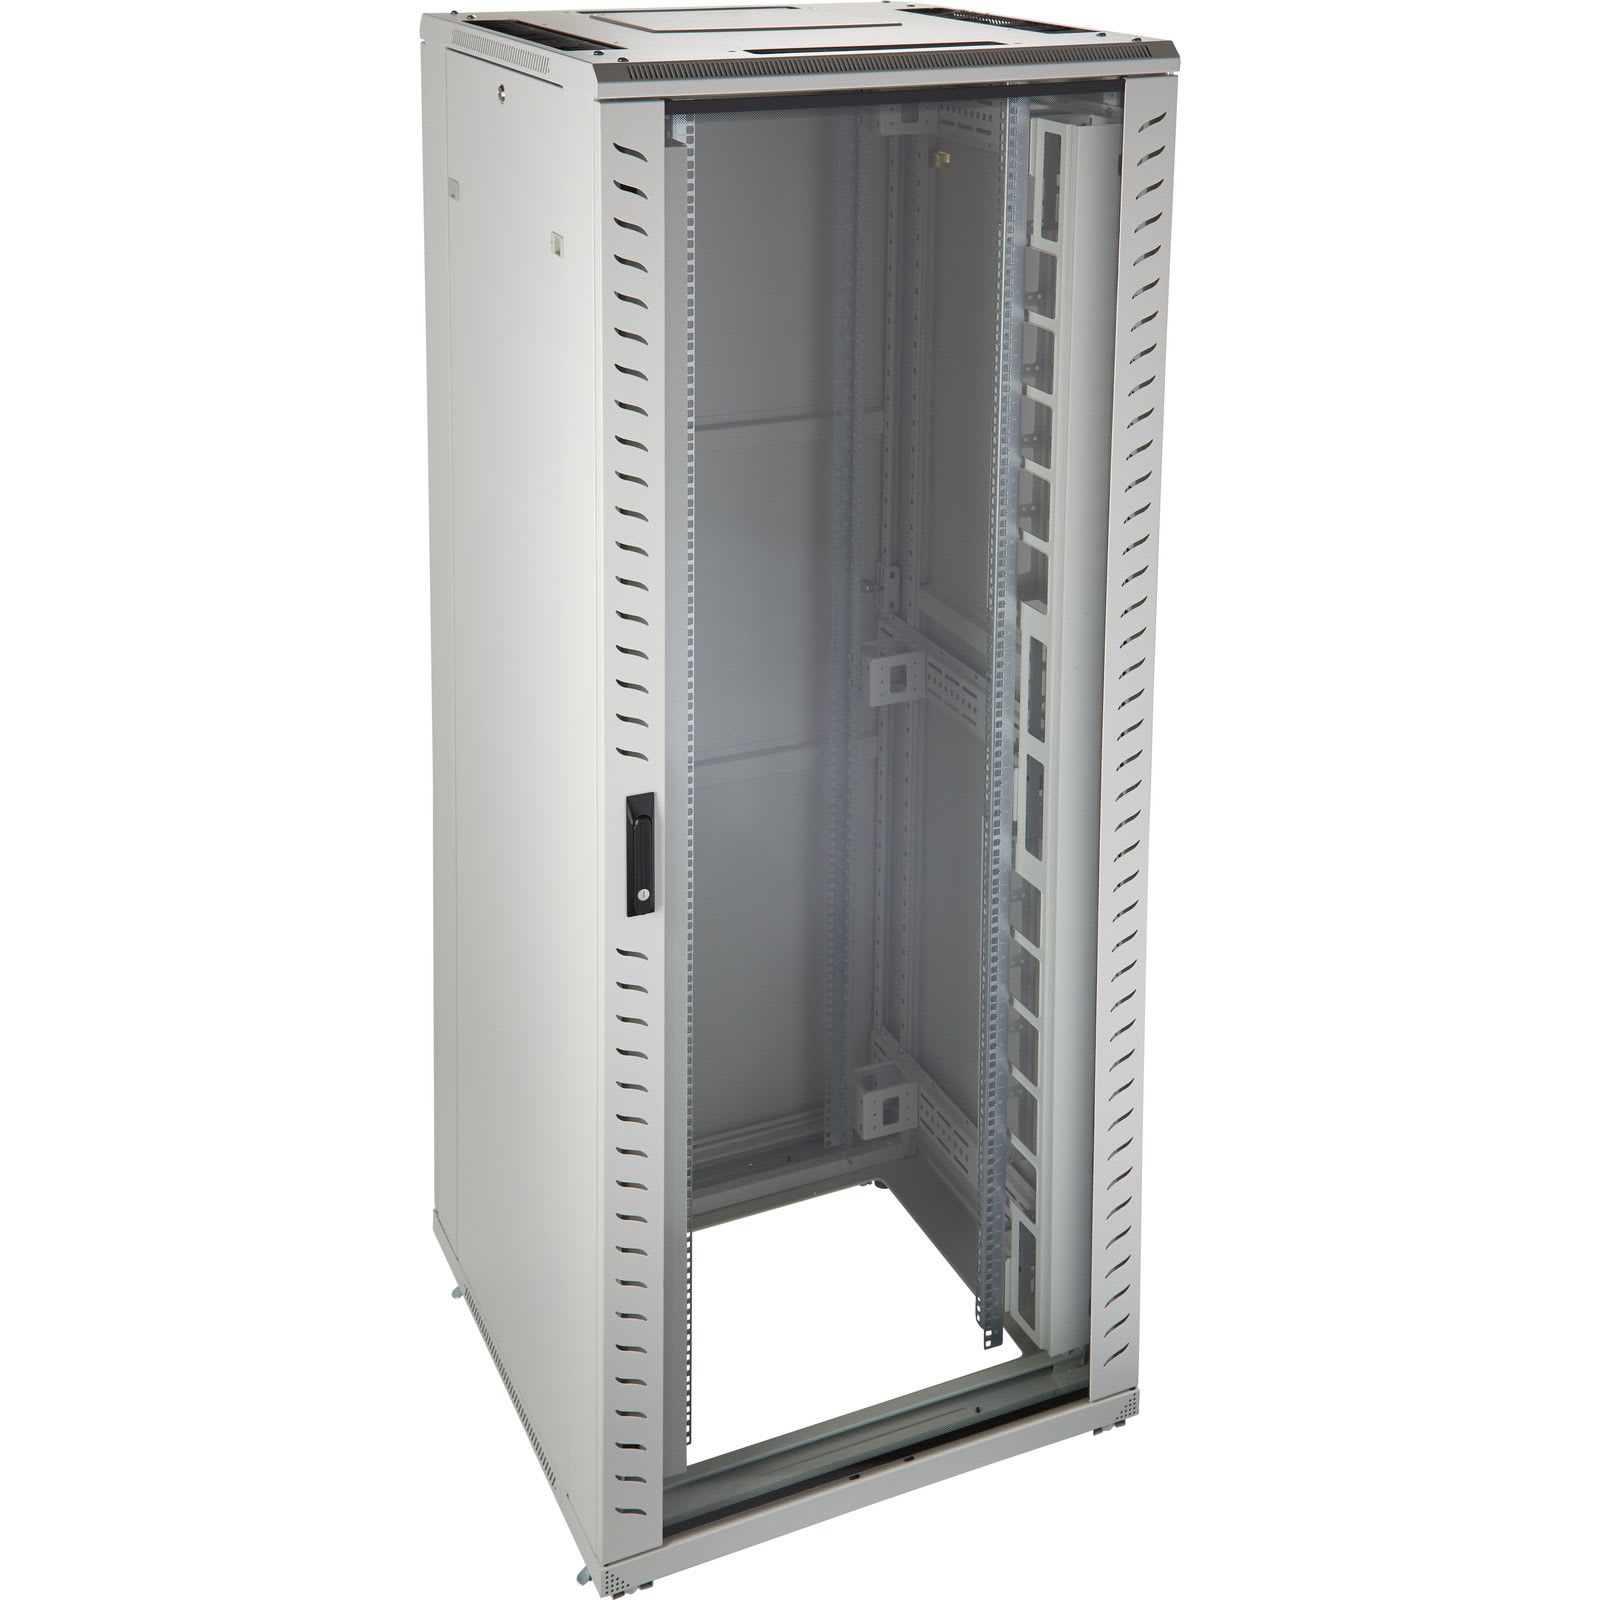 Excel Networking Solutions - Environ CR800 42U Rack 800x800mm Glass (F) Steel (R) B/Panels F/Mgmt Grey White